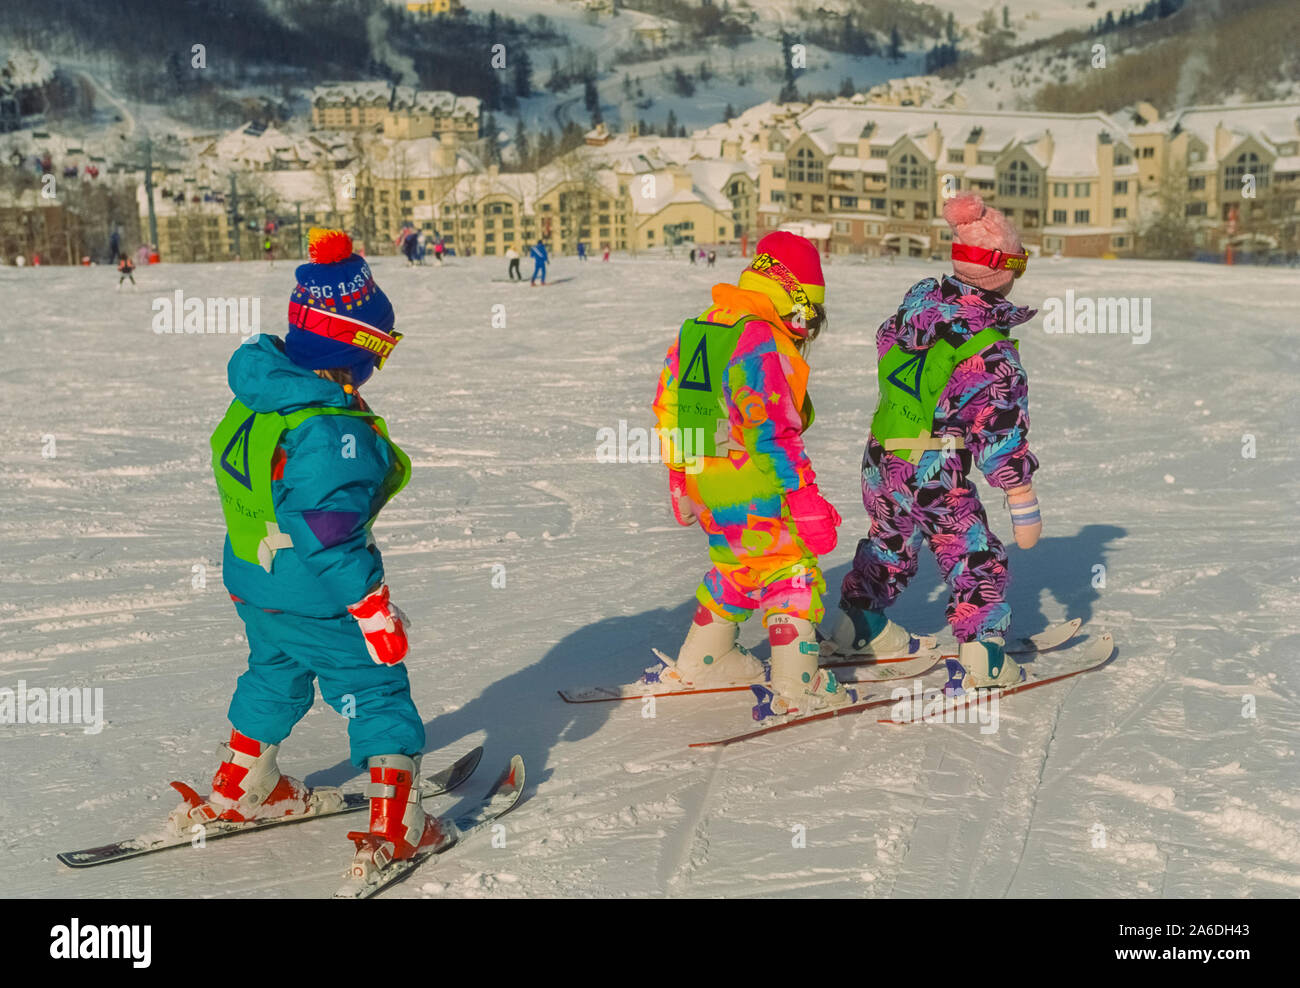 Three young first-time skiers follow one another on a snowy incline during a lesson at the Beaver Creek Ski School in the mountains of Colorado, USA. The skiing lessons at Beaver Creek Resort are designed for different ages, beginning with these three- to four-year-old children in their colorful snowsuits. Stock Photo